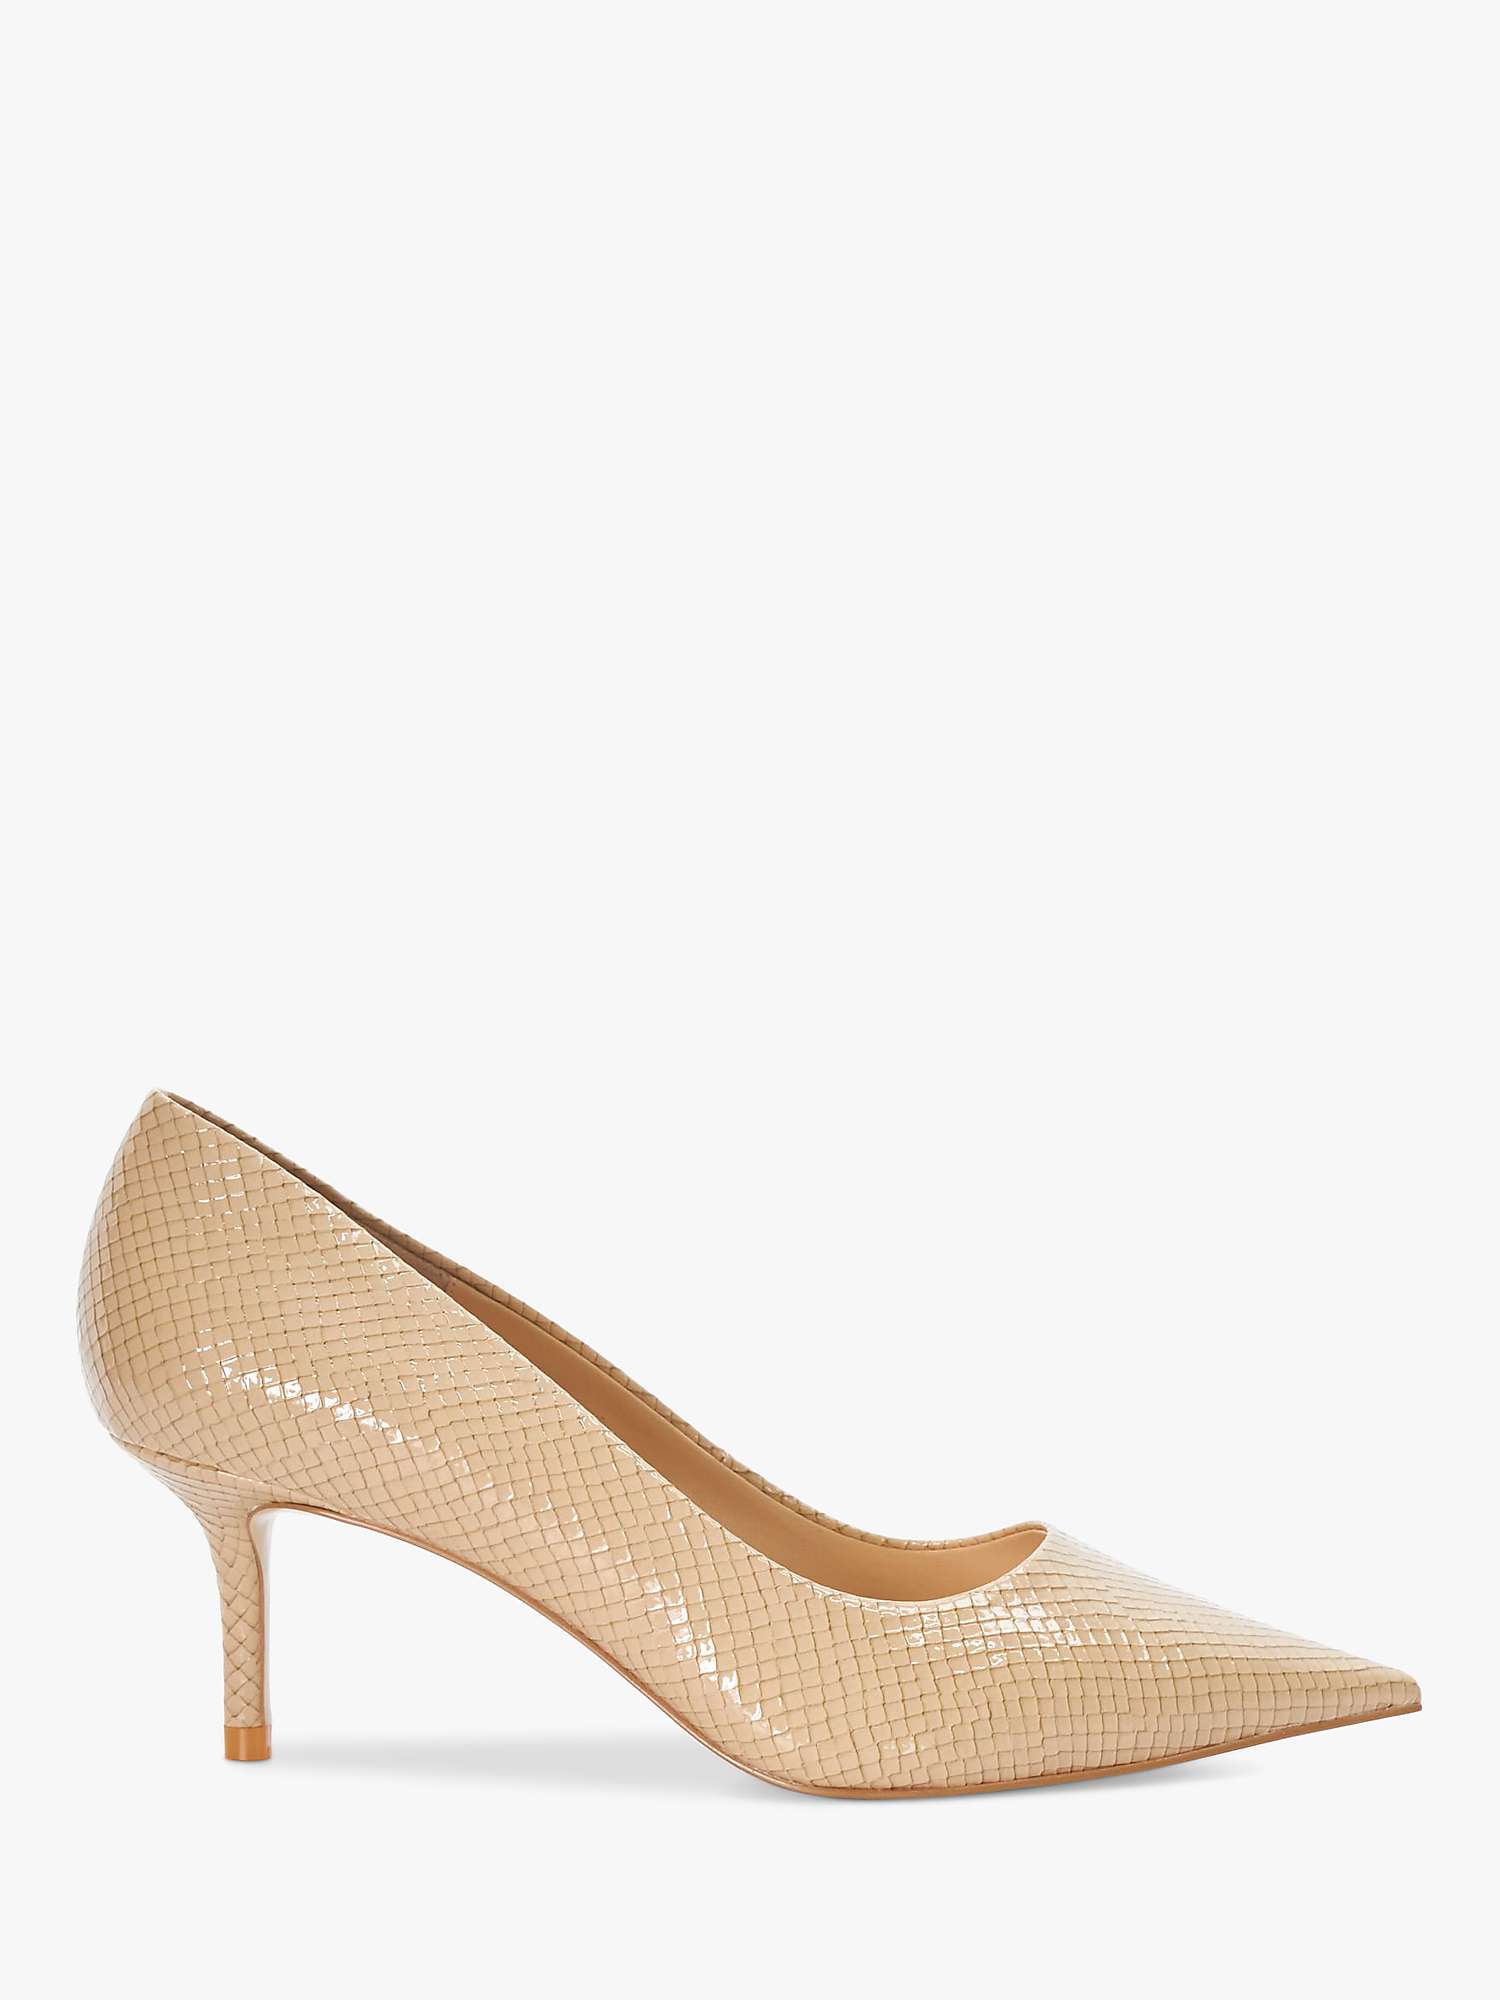 Buy Dune Absolute Reptile Mid Heel Court Shoes, Blush Online at johnlewis.com